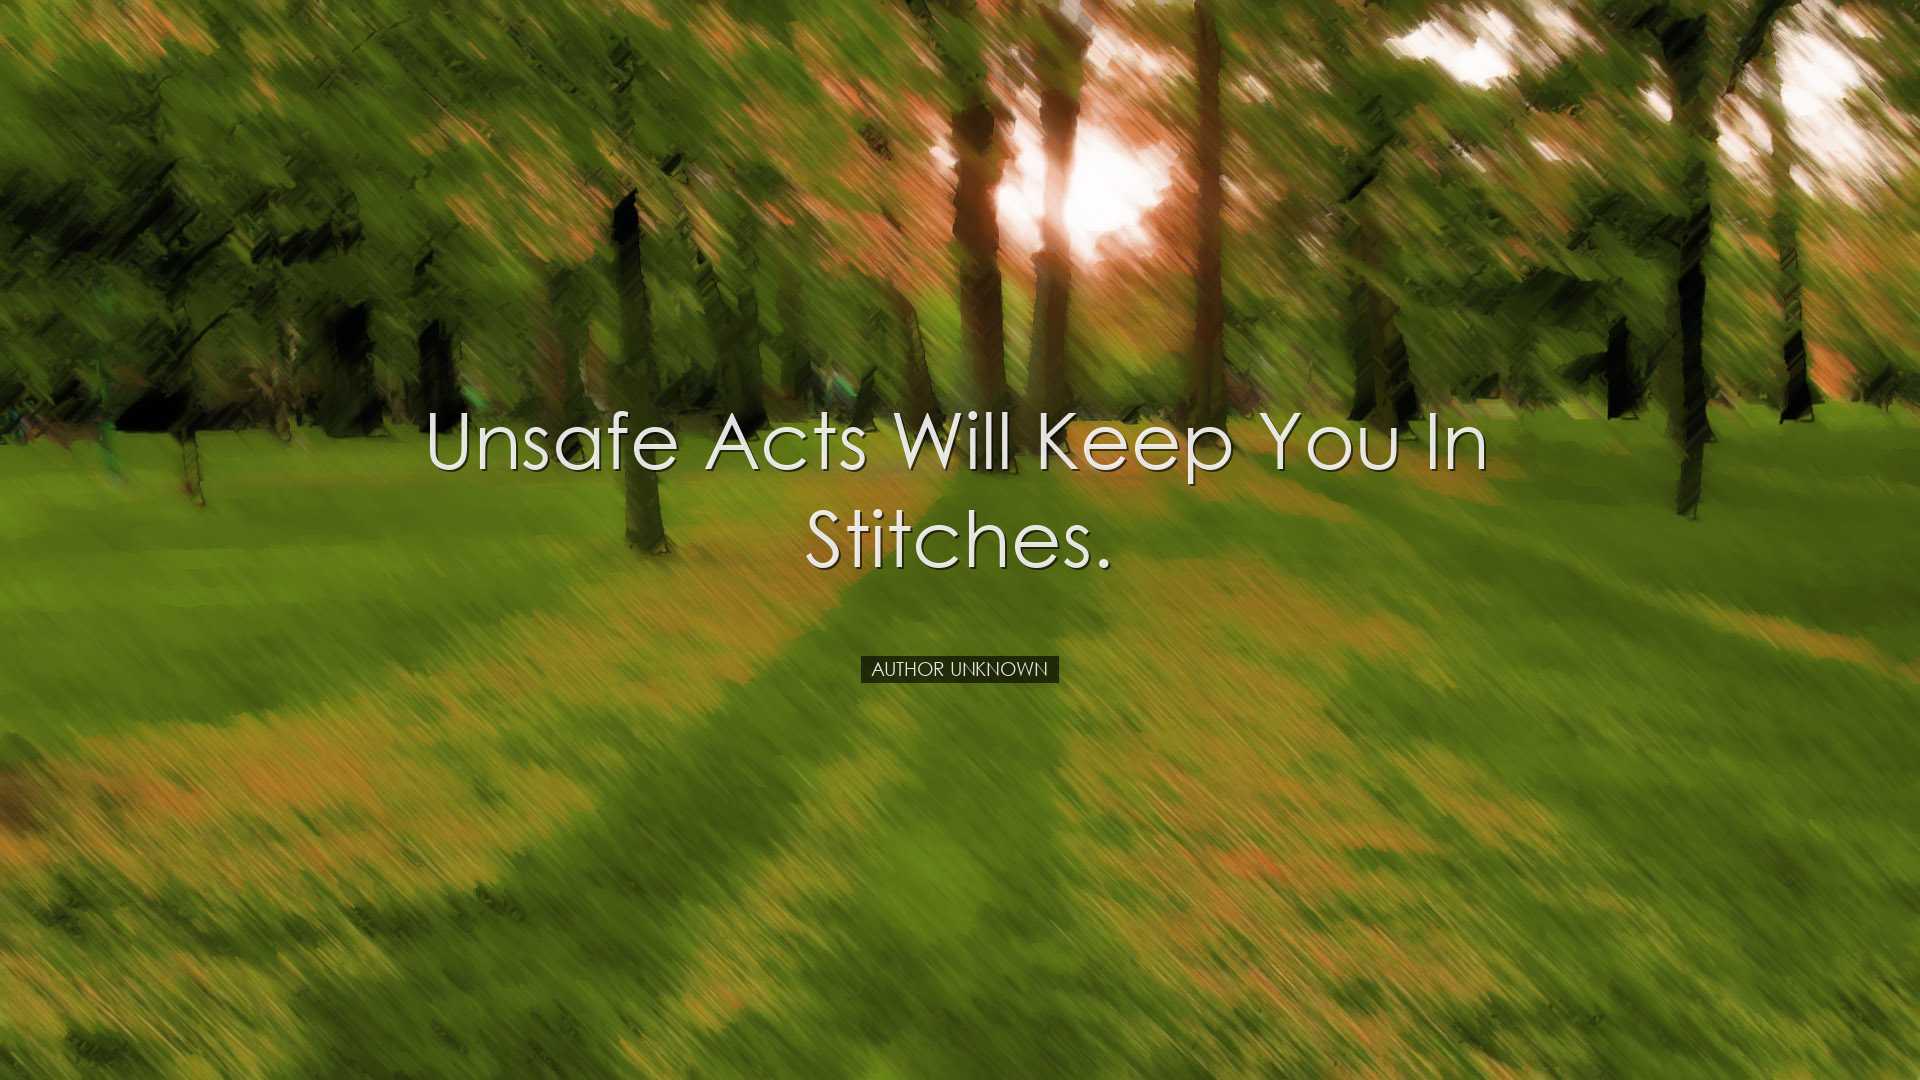 Unsafe acts will keep you in stitches. - Author unknown